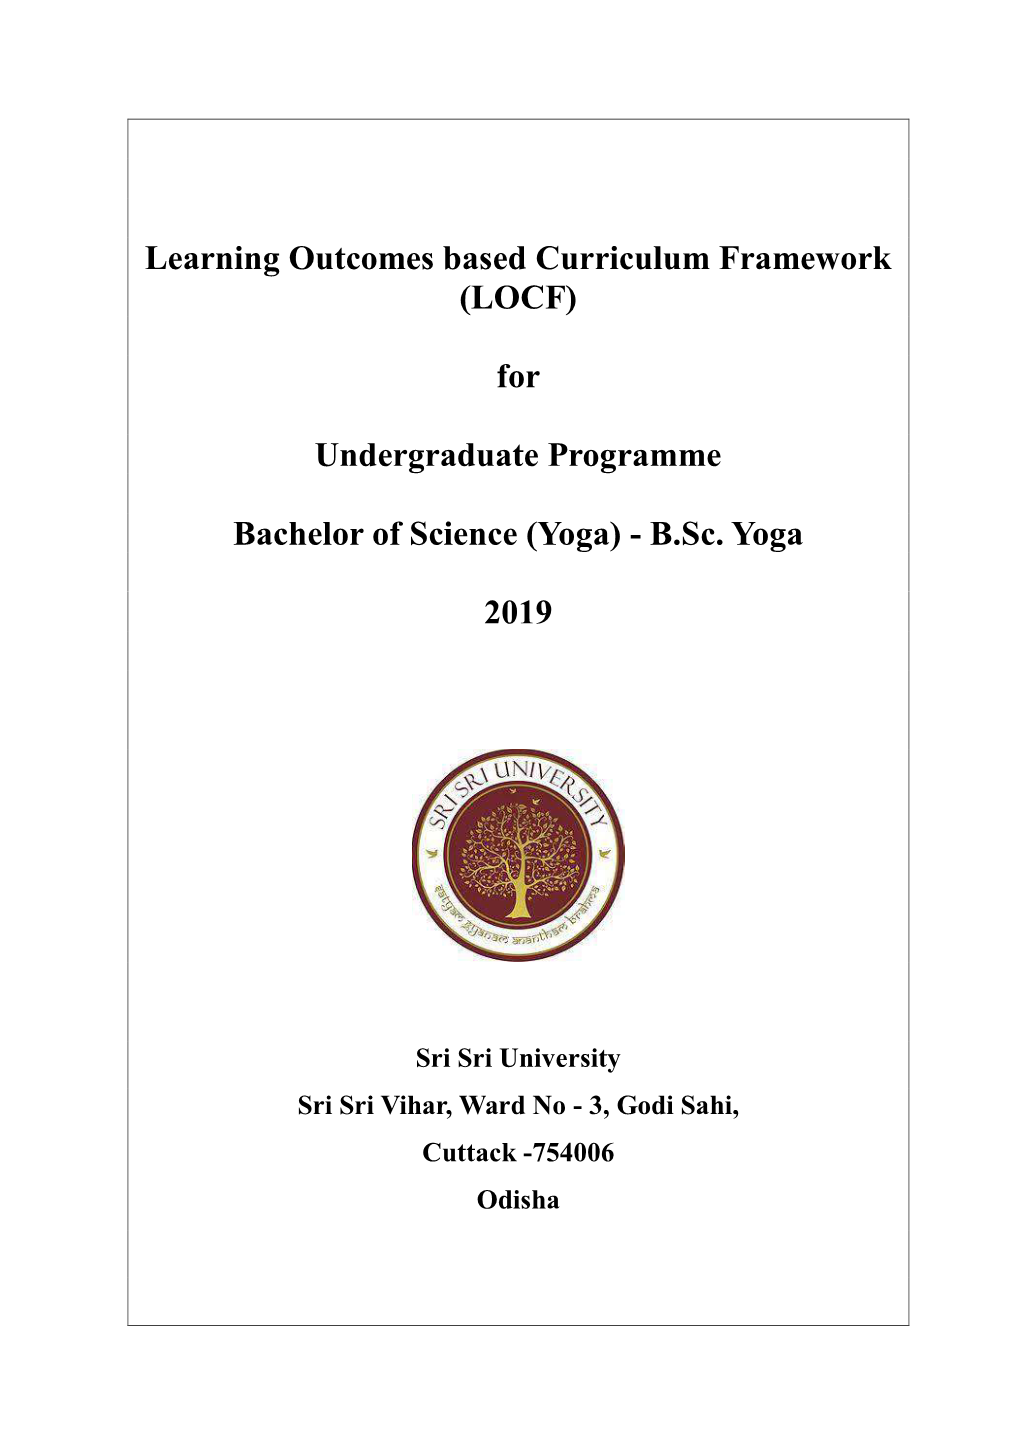 For Undergraduate Programme Bachelor of Science (Yoga)